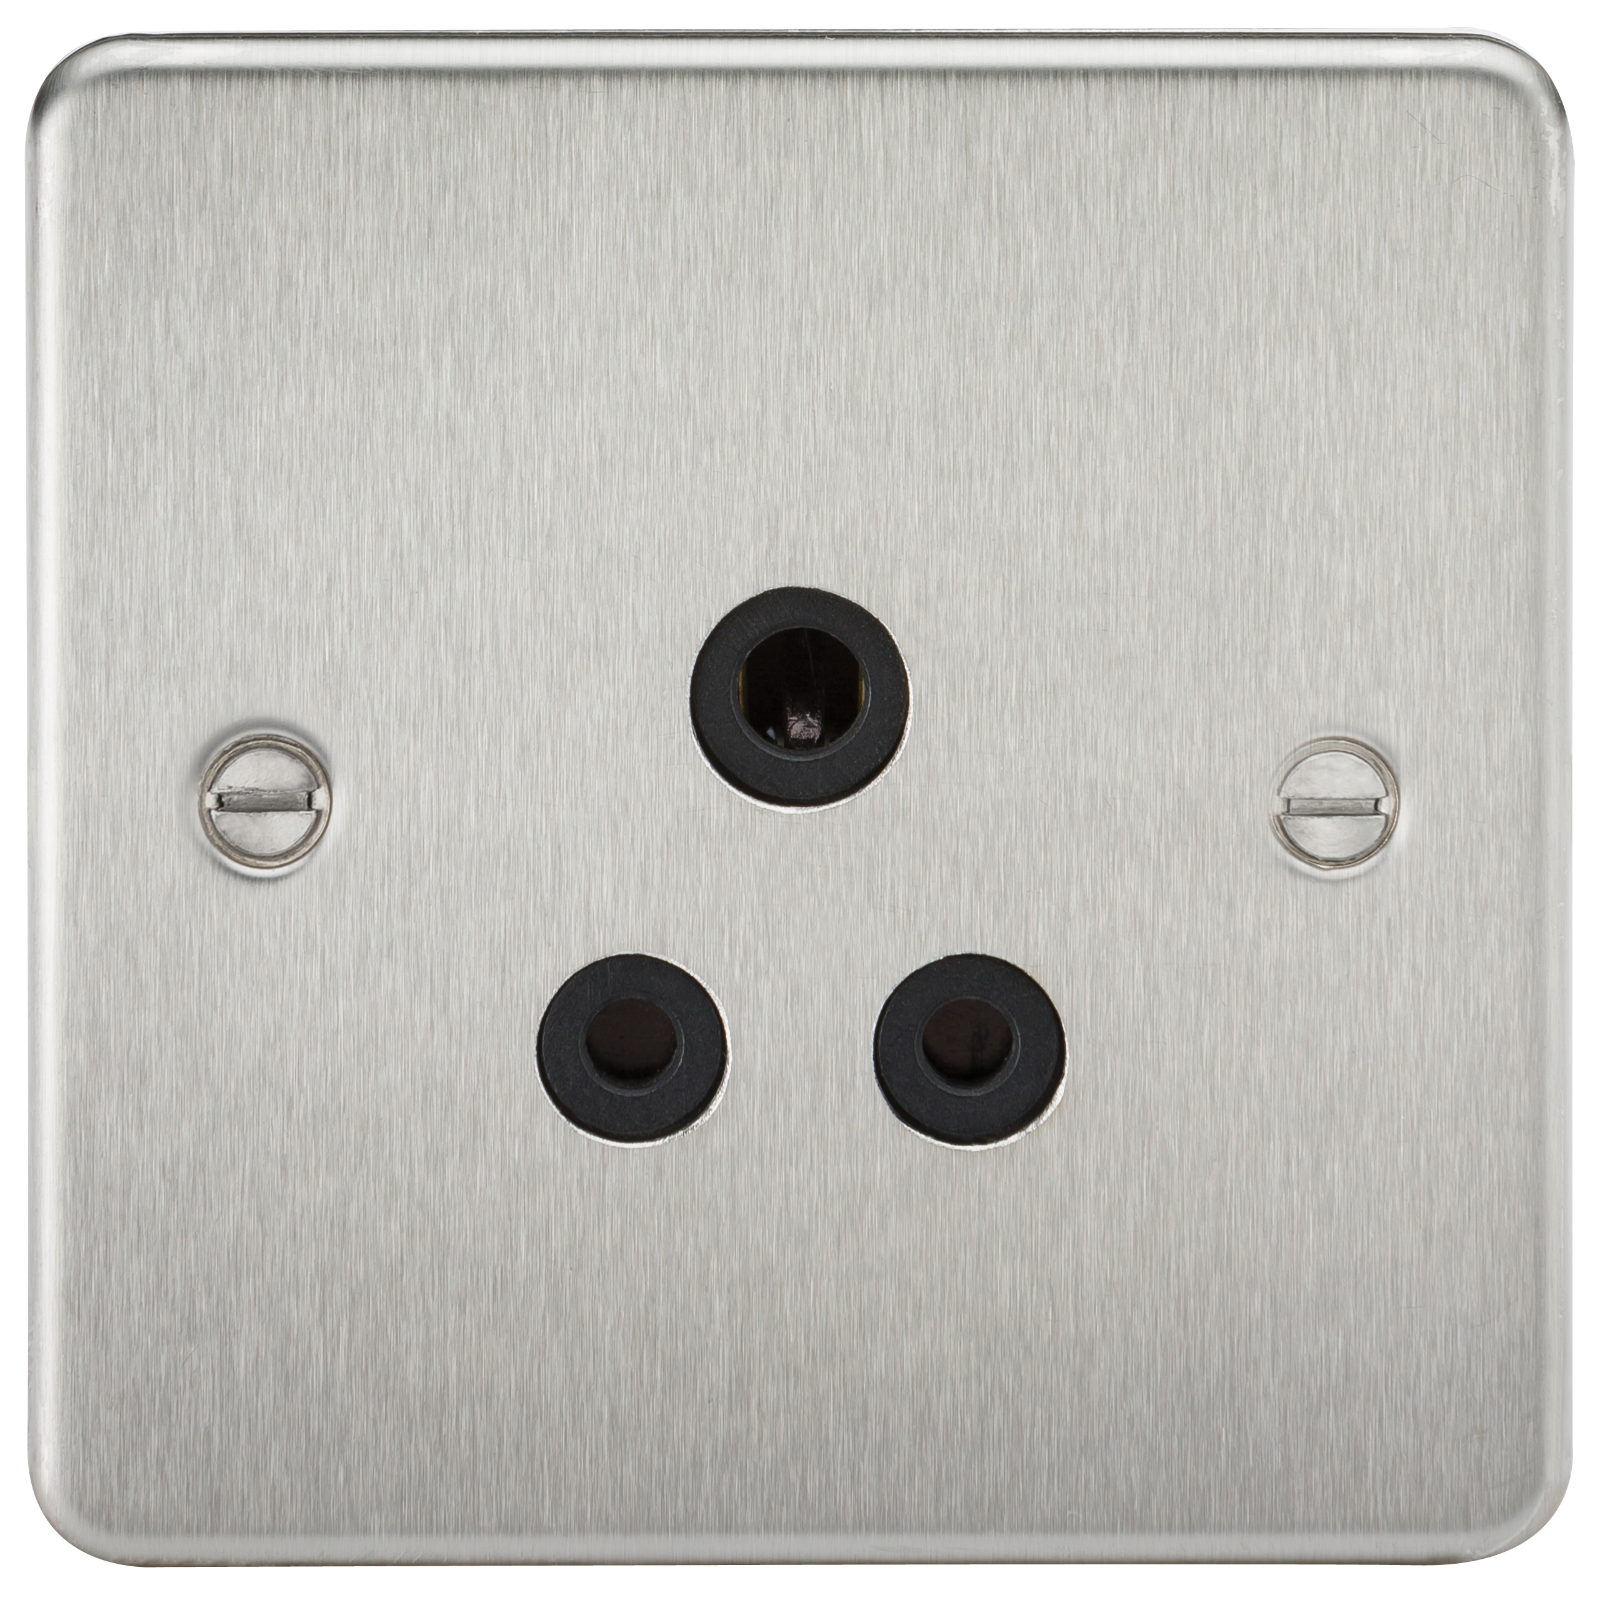 Flat Plate 5A Unswitched Socket - Brushed Chrome With Black Insert - FP5ABC 